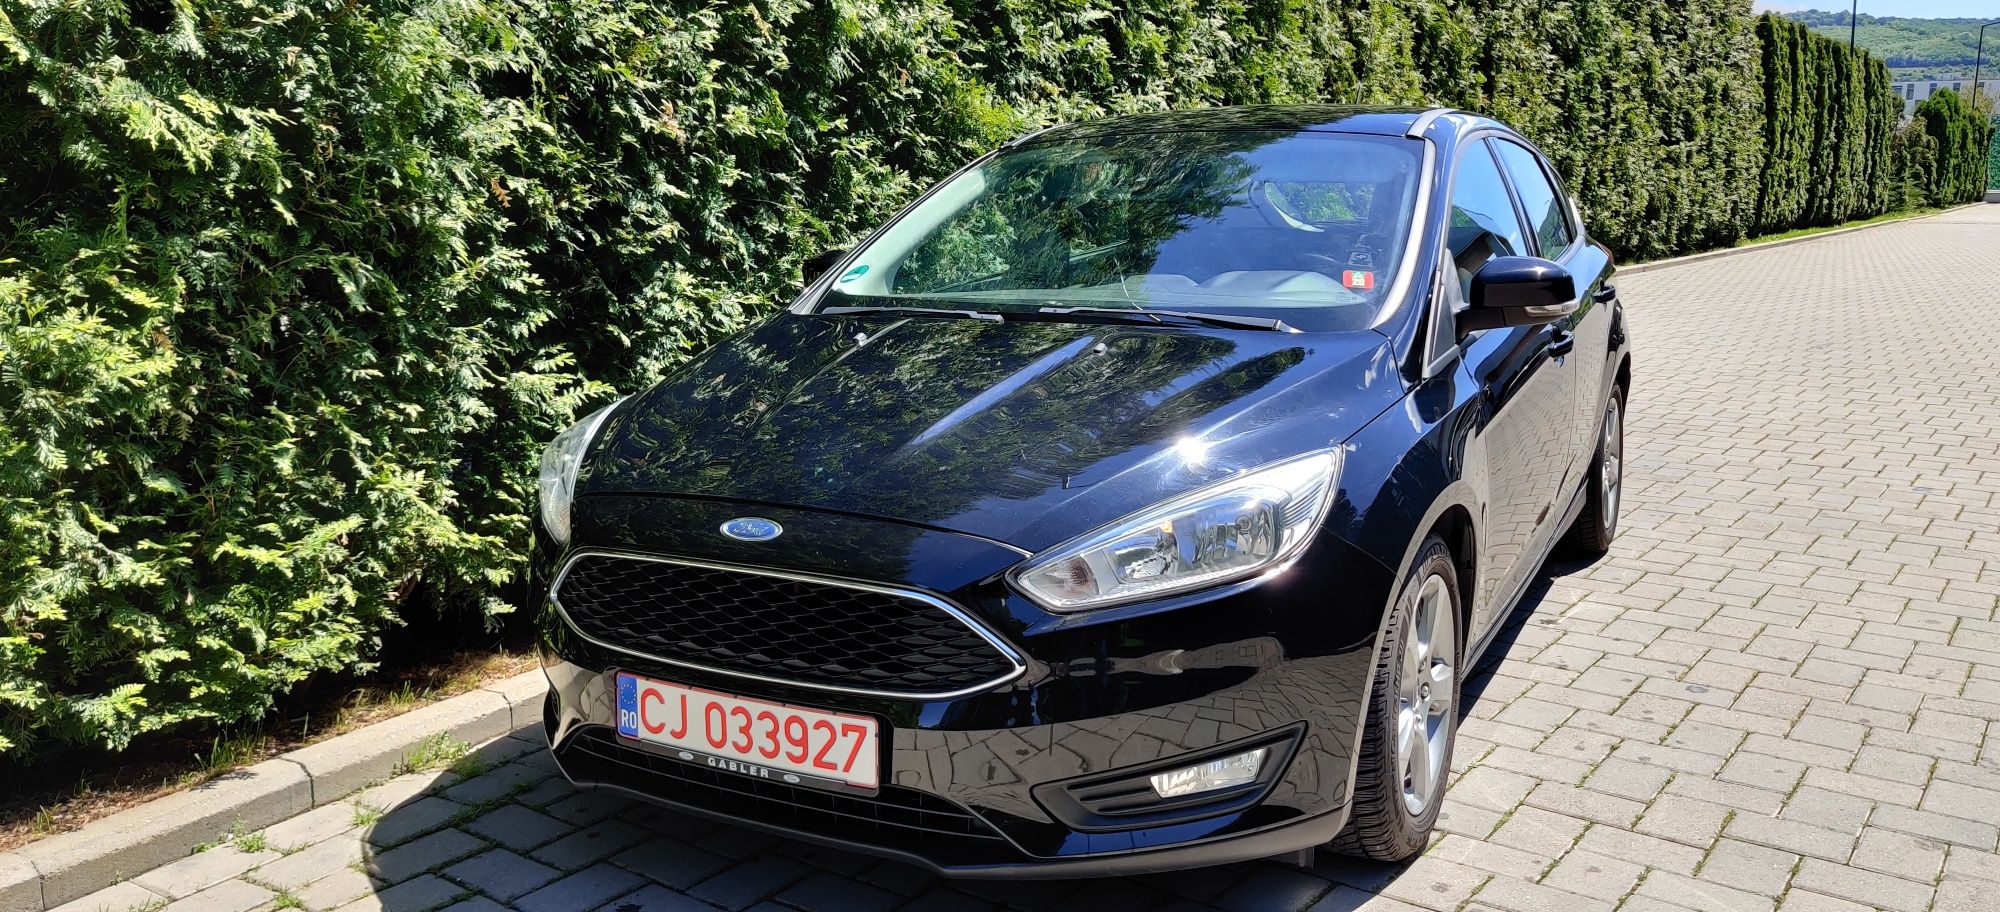 Vând Ford Focus 1.0 Ecoboost 125 CP An 2016